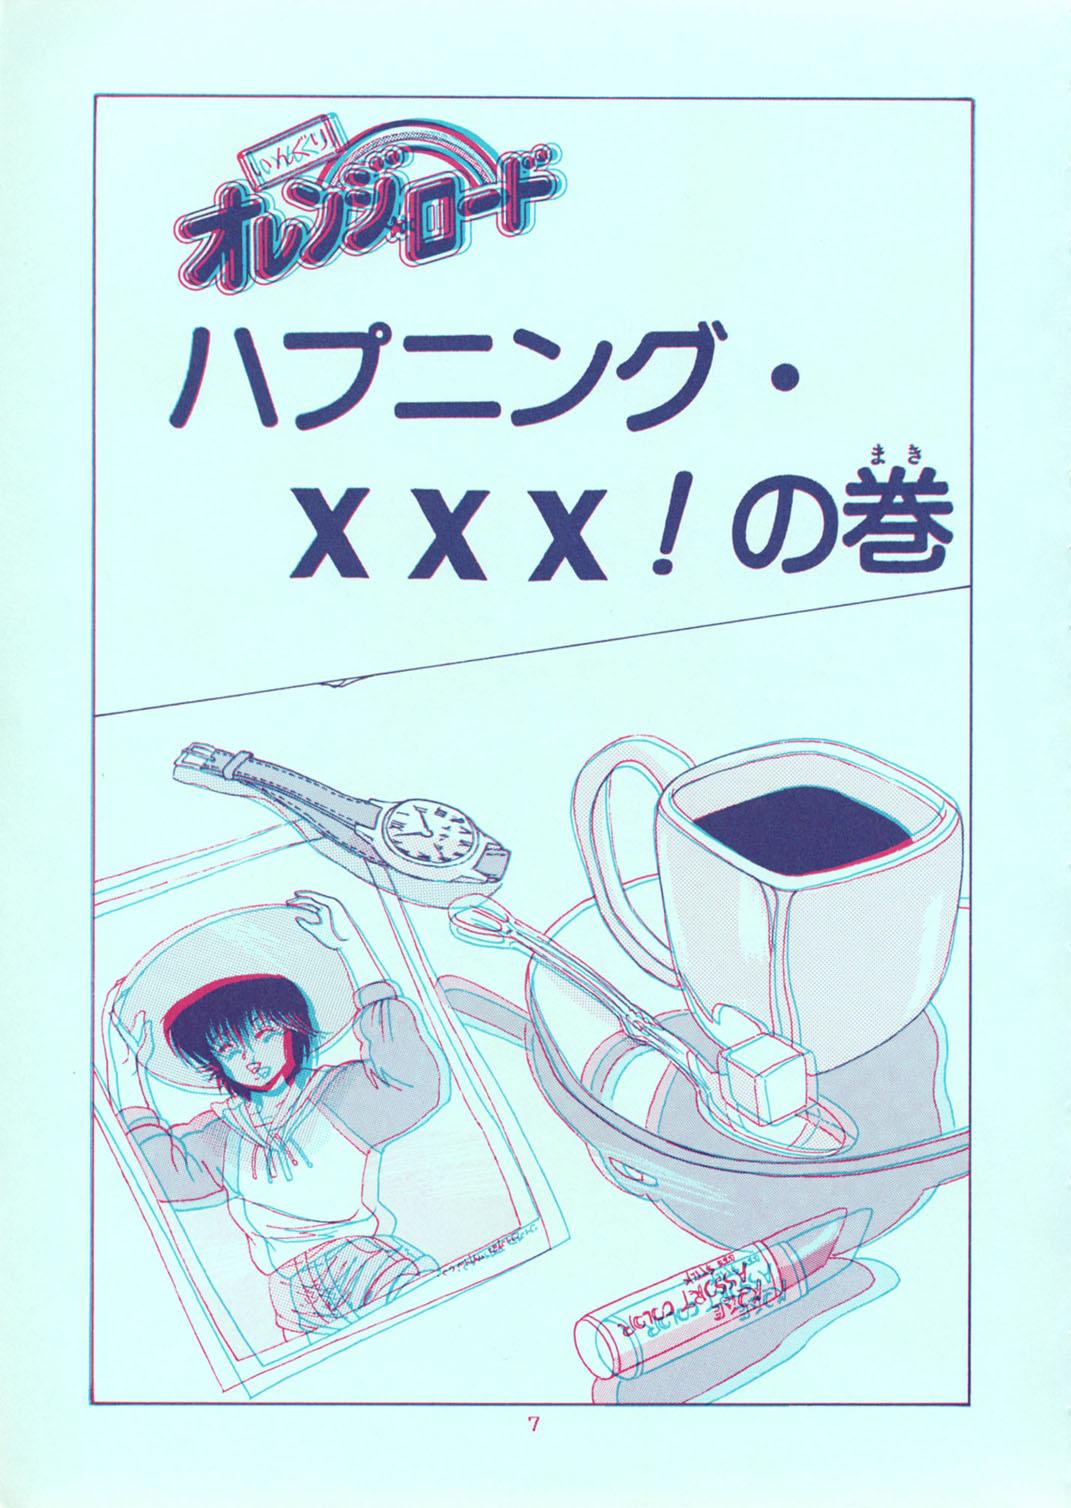 Great Fuck [Group Neko (Woody)] Squeeze the Orange K-I-M-A-G-U-R-E 3D Special Edition (Kimagure Orange Road) - Kimagure orange road Chudai - Page 7